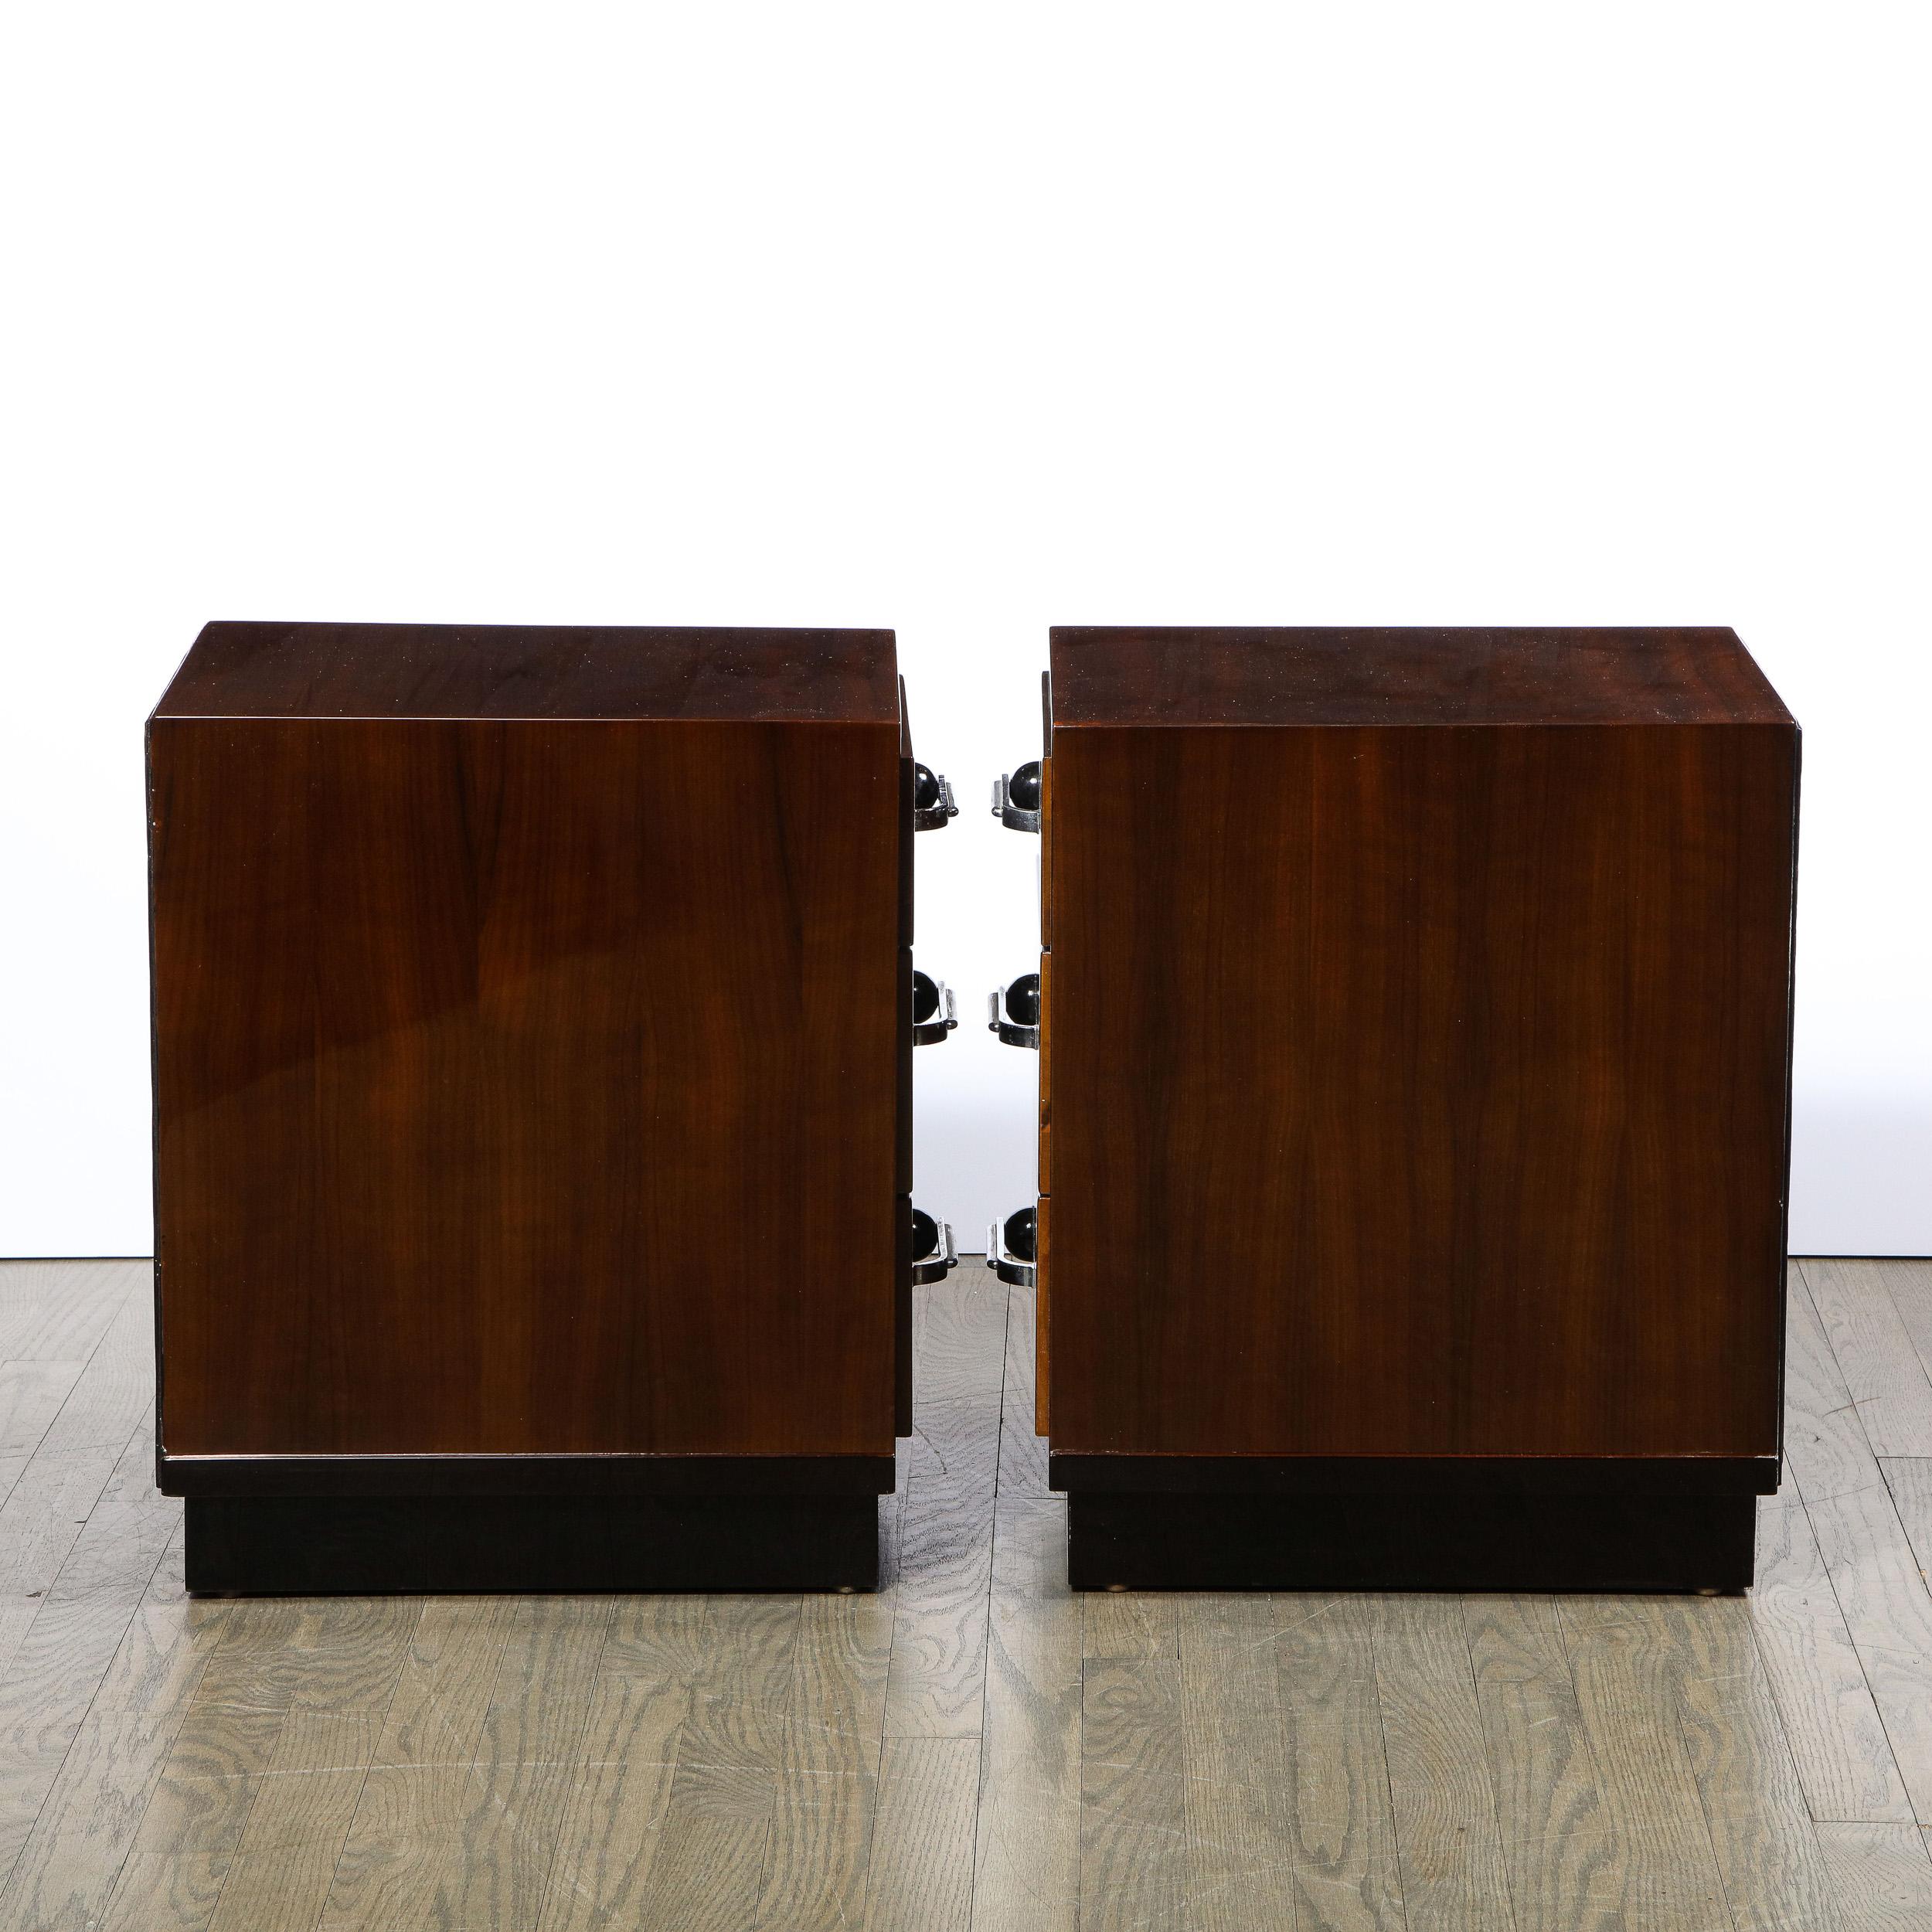 Pair of Art Deco Nightstands in Lacquer & Walnut w/ Streamlined Chrome Pulls 6